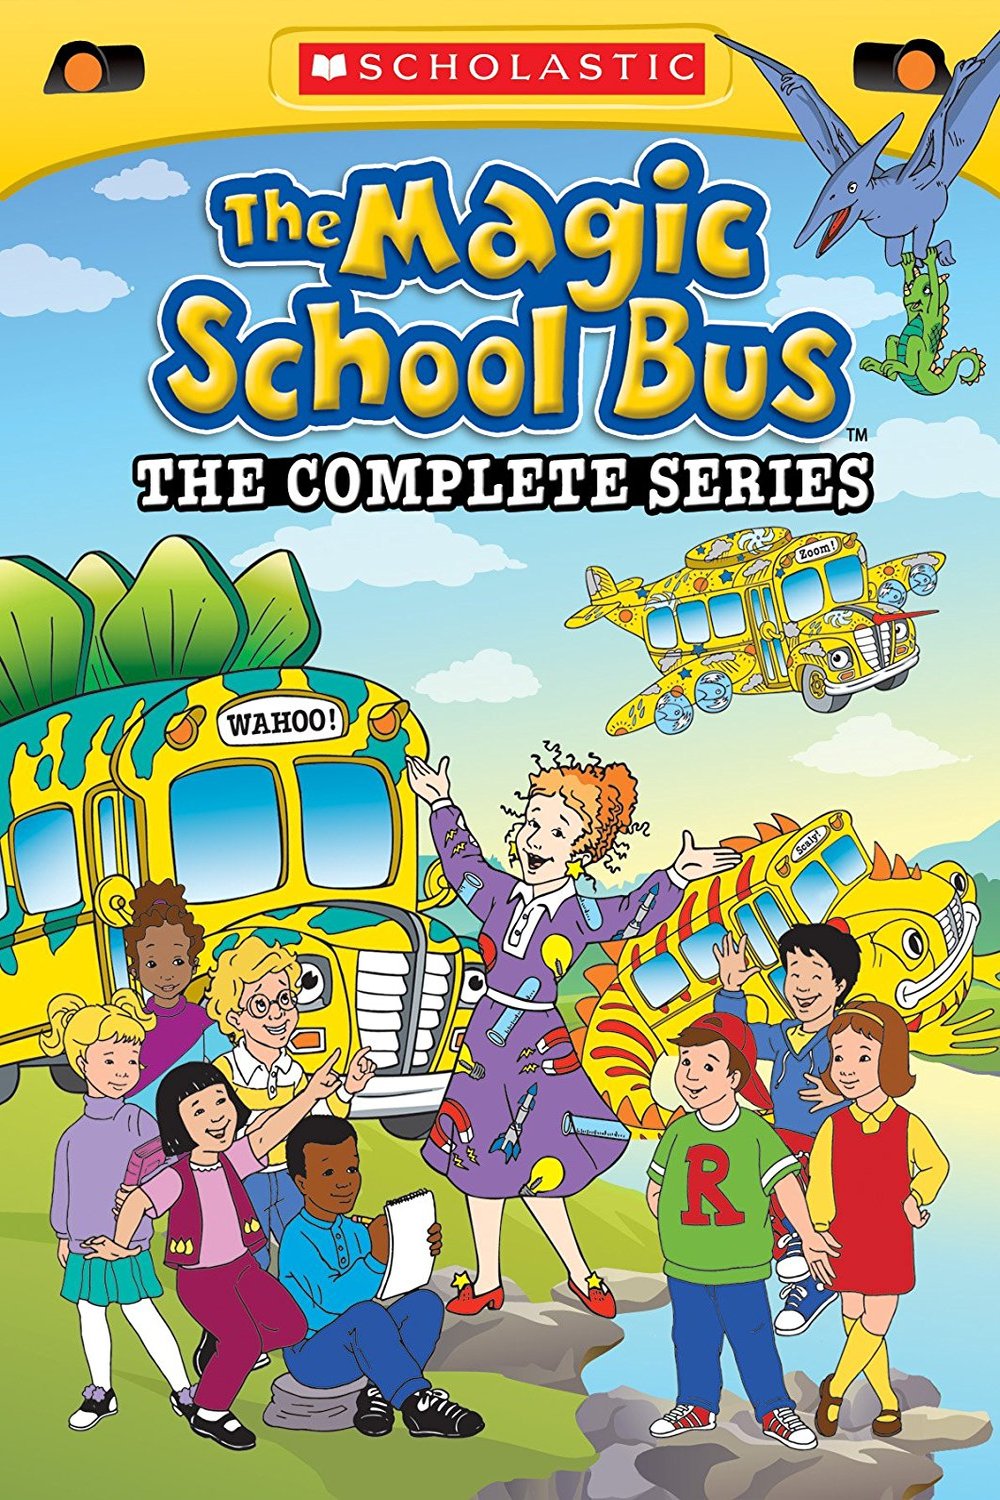 Poster of the movie The Magic School Bus